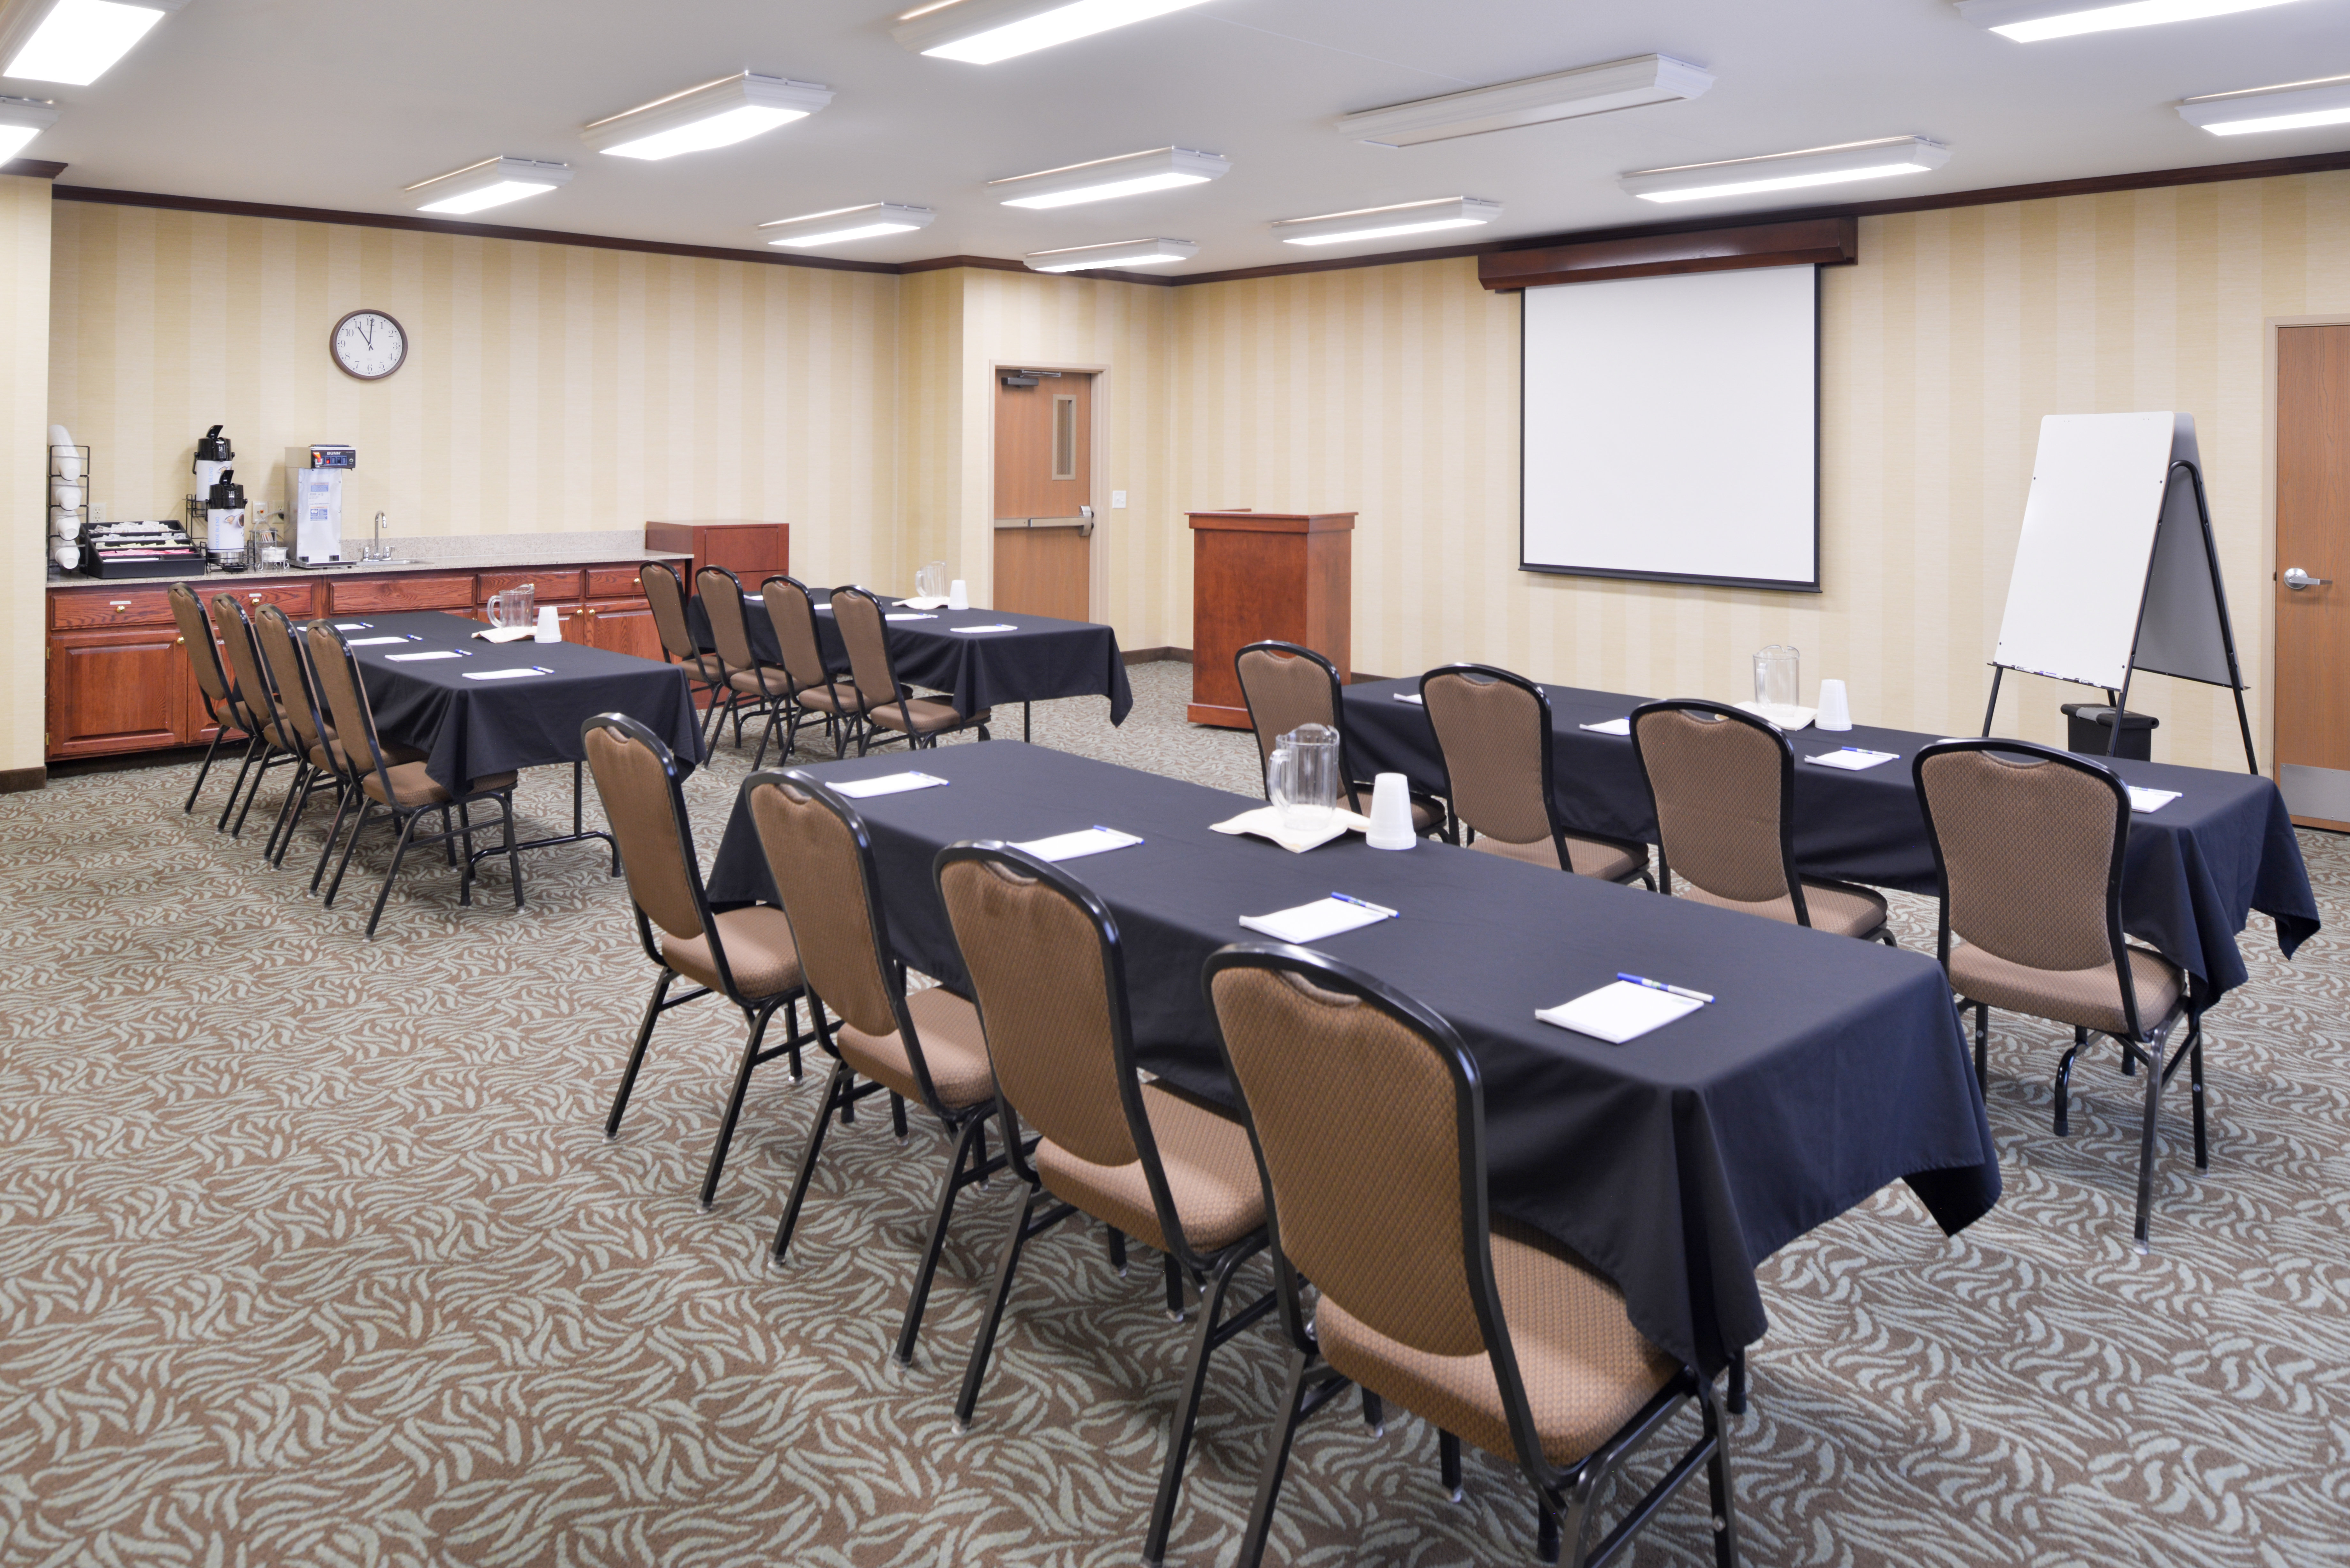 The Barnes Room is 783 Sq Ft & Seats up to 36 classroom style.